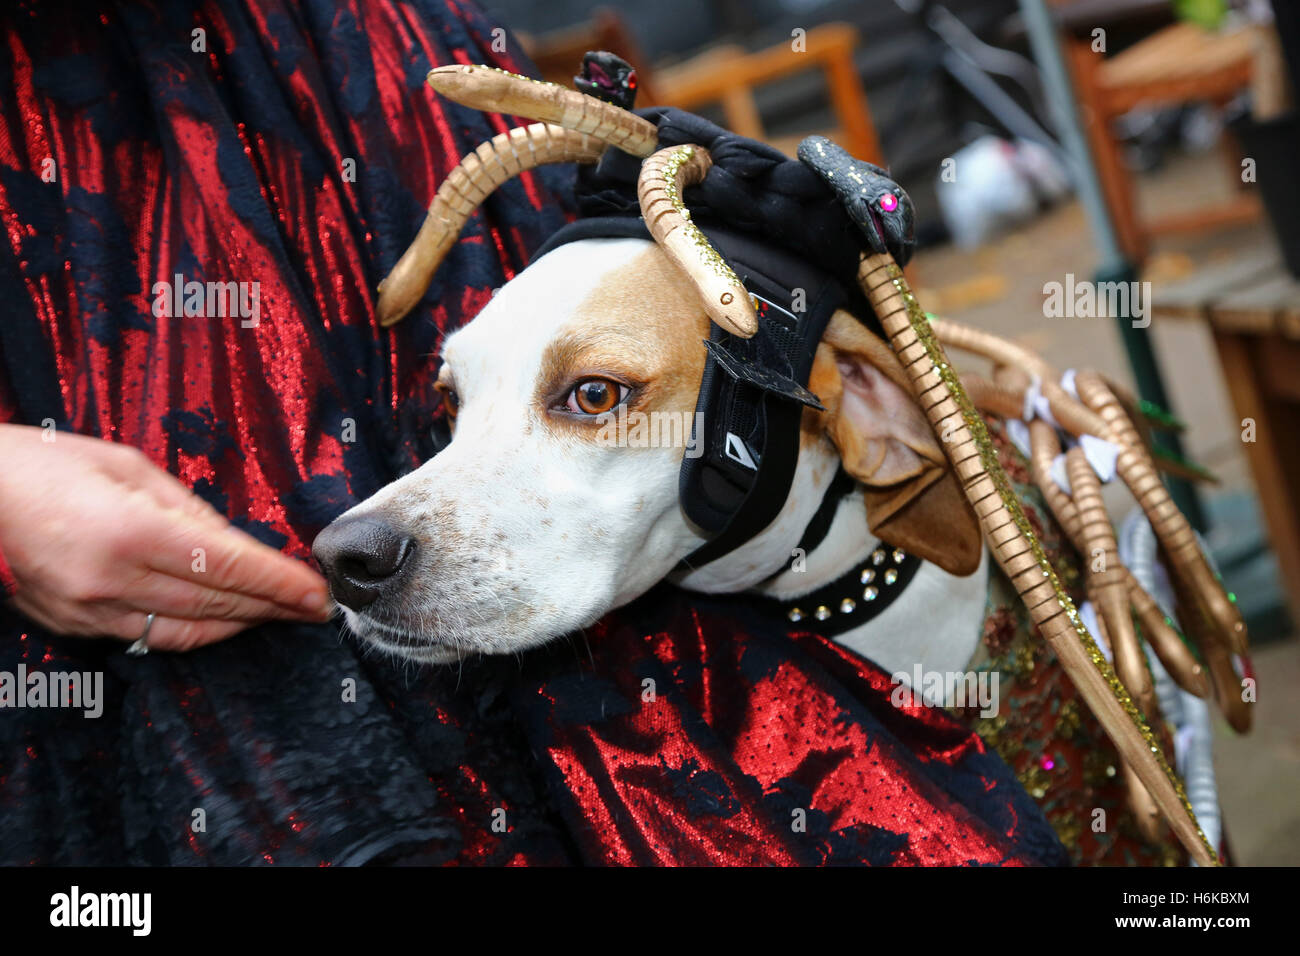 London, UK. 30th October 2016. Dottie the Pointer dressed up as a Medusa in  Halloween fancy dress costume for the All Dogs Matter Halloween Dog Walk to  raise funds for the charity